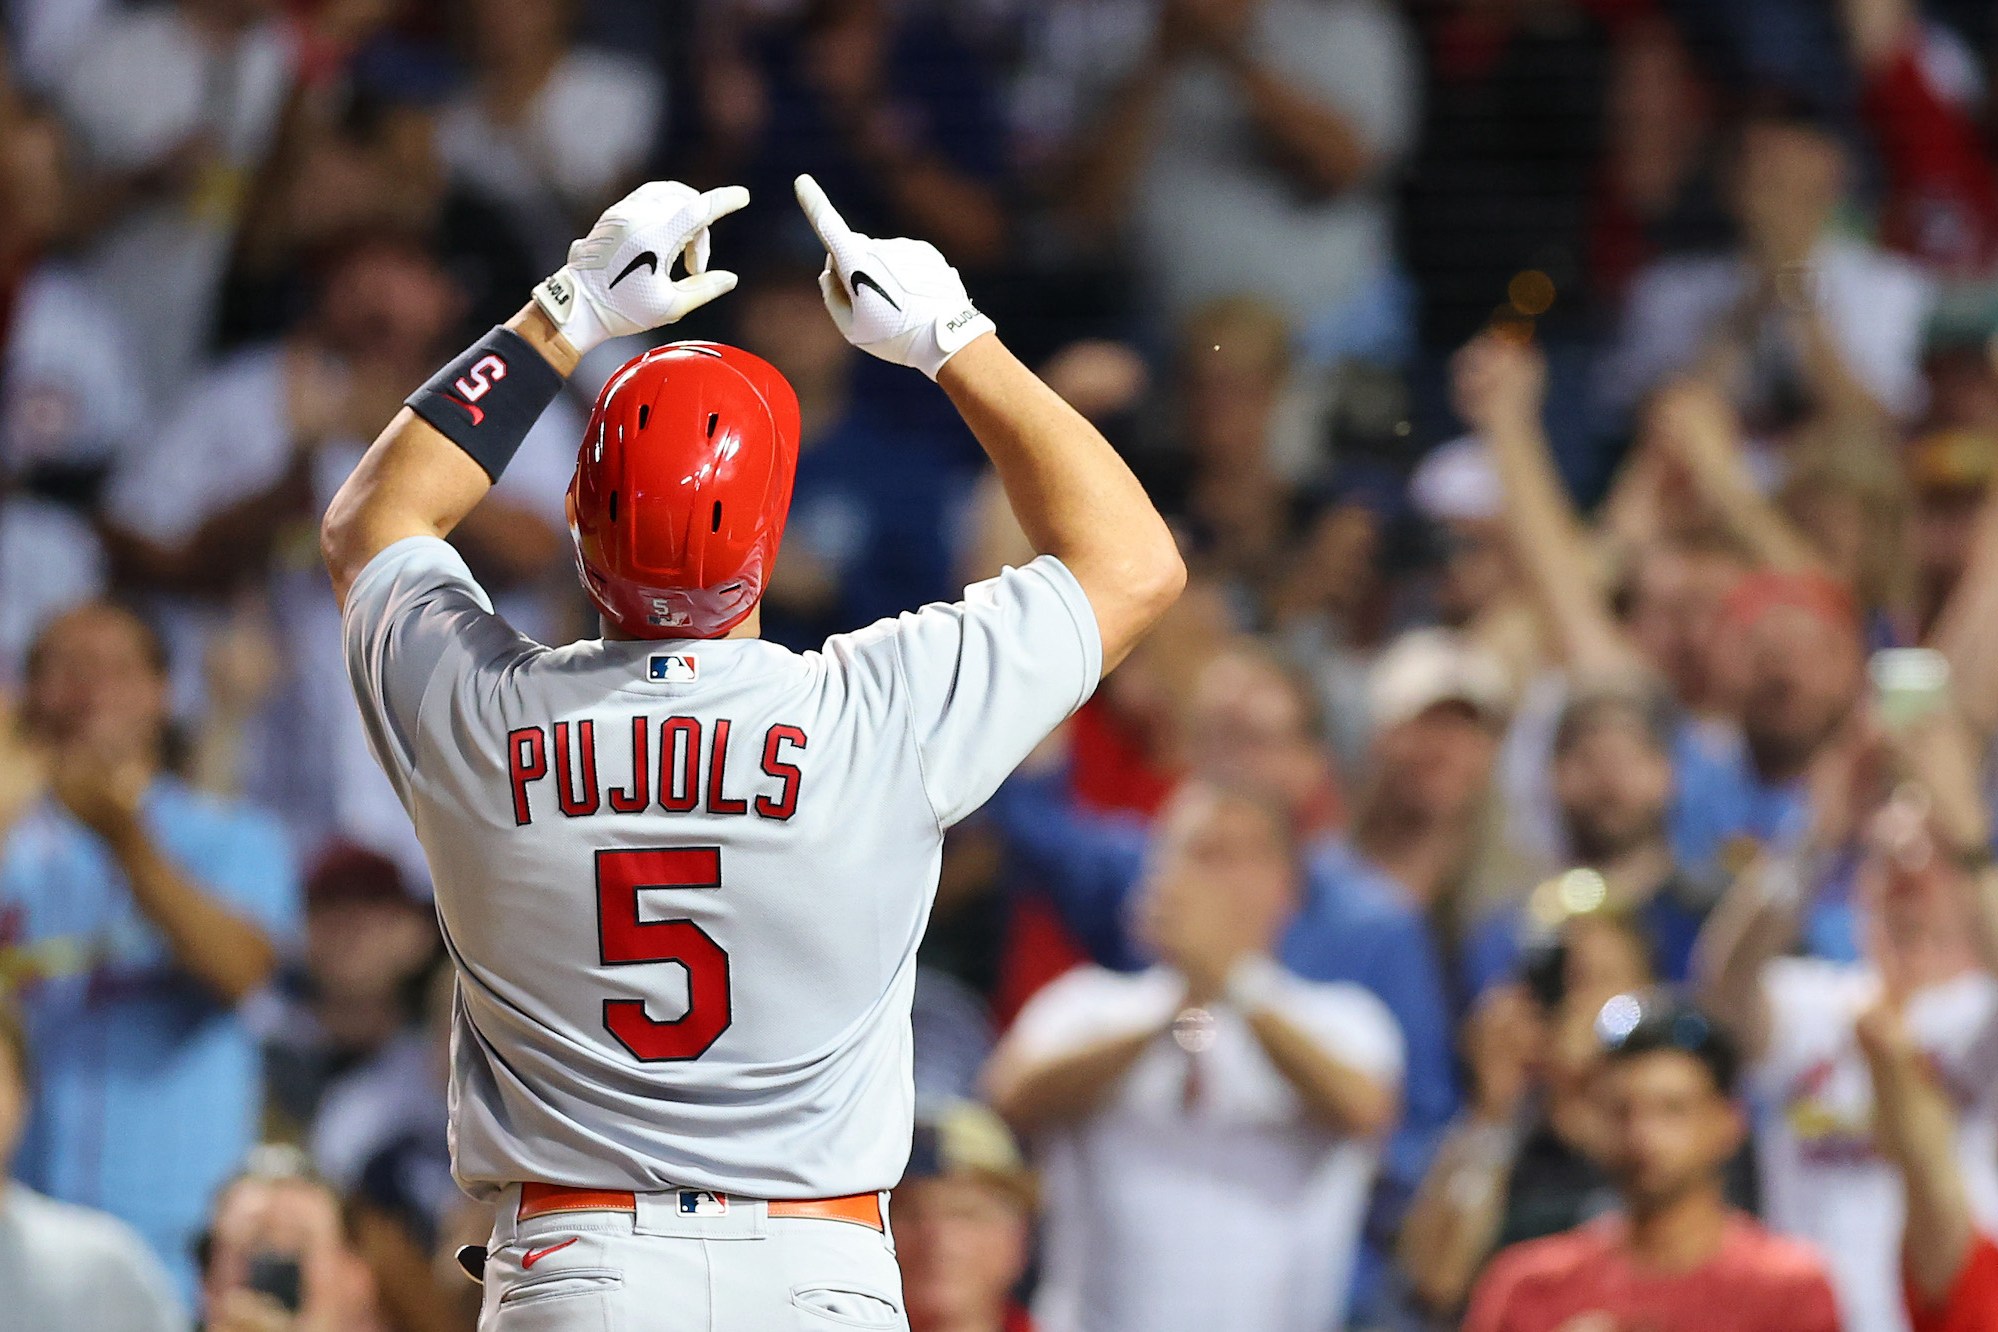 CHICAGO, ILLINOIS - AUGUST 22: Albert Pujols #5 of the St. Louis Cardinals celebrates his solo home run during the seventh inning against the Chicago Cubs at Wrigley Field on August 22, 2022 in Chicago, Illinois. (Photo by Michael Reaves/Getty Images)